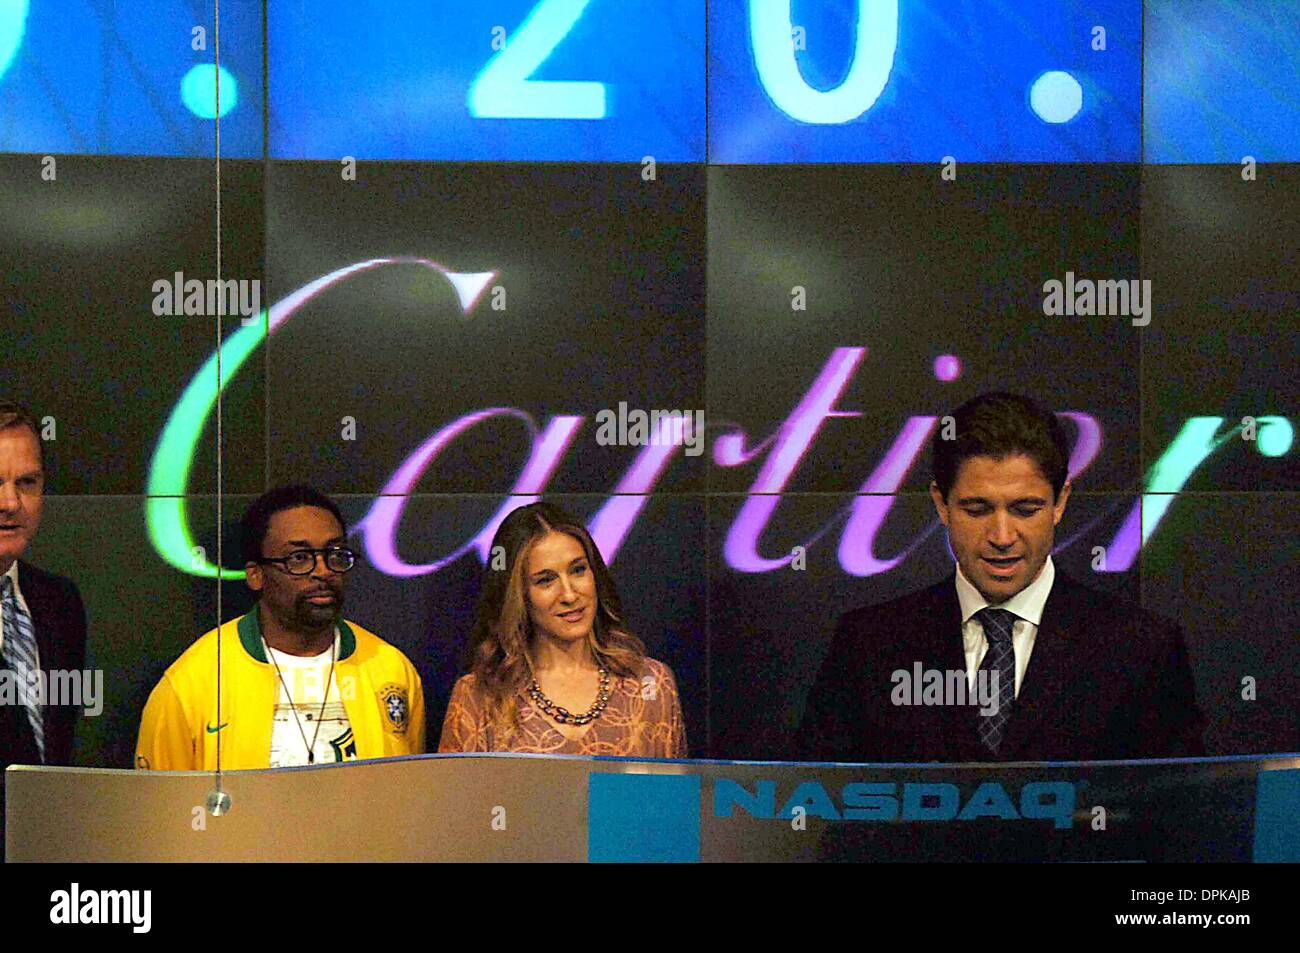 June 8, 2006 - K48239AR.CELEBRITIES TO INTRODUCE NATIONAL CHARITY INITIATIVE FOR UNICEF AND THE TISCH FILM SCHOOL AT NYU THROUGH THE SALE OF THE LOVE JEWELRY LINE BY CARTIER WAS HELD AT THE NASDAQ HEADQUARTERS, NEW YOKR CITY.06-08-2006. ANDREA RENAULT-   2006.SARAH JESSICA PARKER.SPIKE LEE.FREDERIC DE NARP OF CARTIER(Credit Image: © Globe Photos/ZUMAPRESS.com) Stock Photo